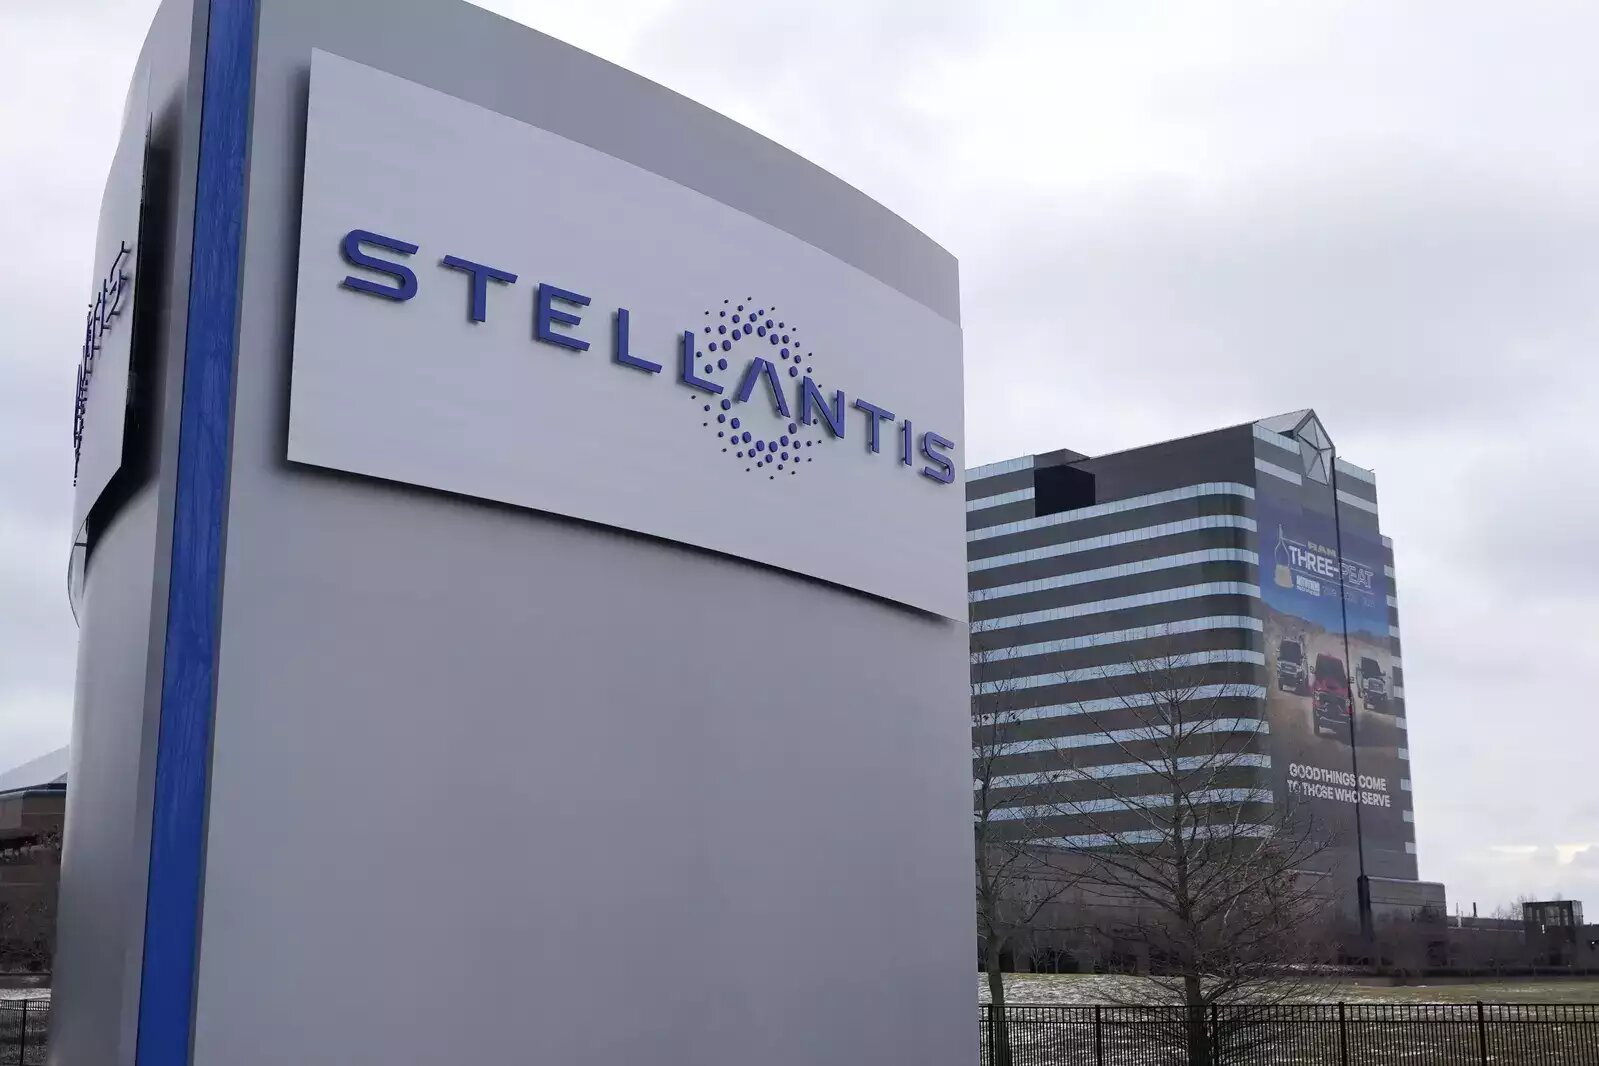 https://e-vehicleinfo.com/stellantis-looks-to-india-for-affordable-evs-for-europe-amid-competition-from-china/